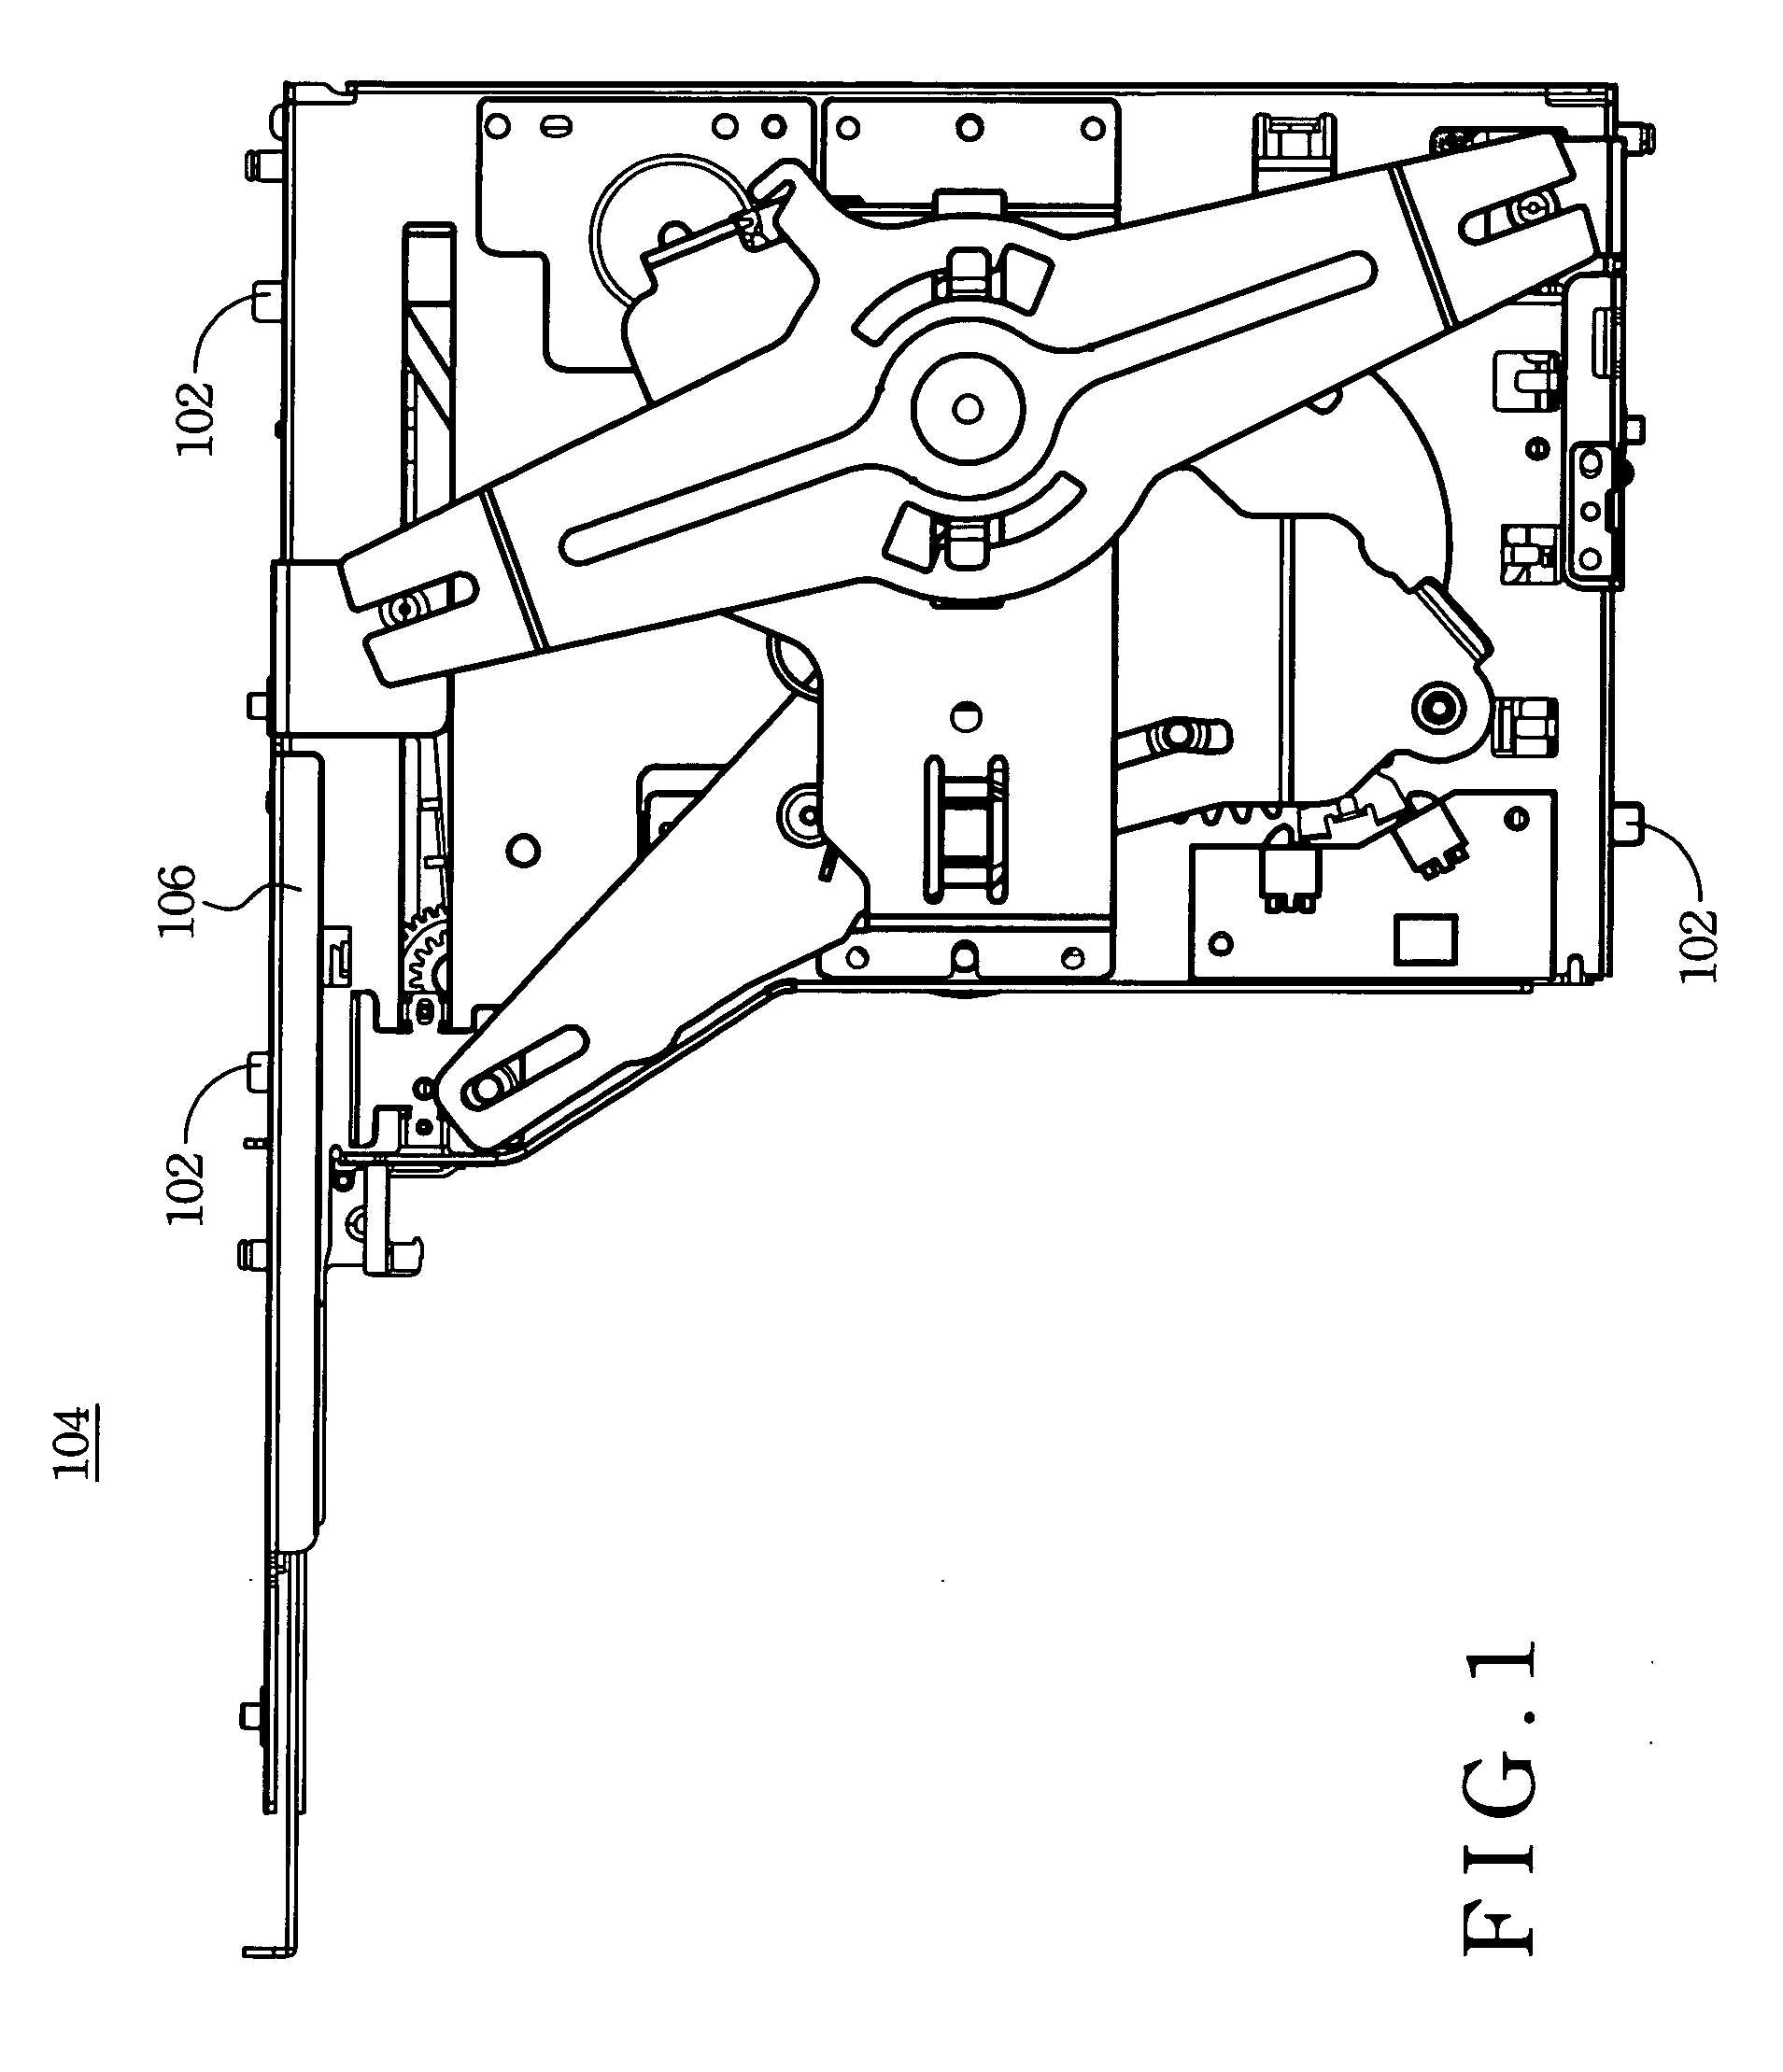 Height-determining method of an elevating device for a disc changer